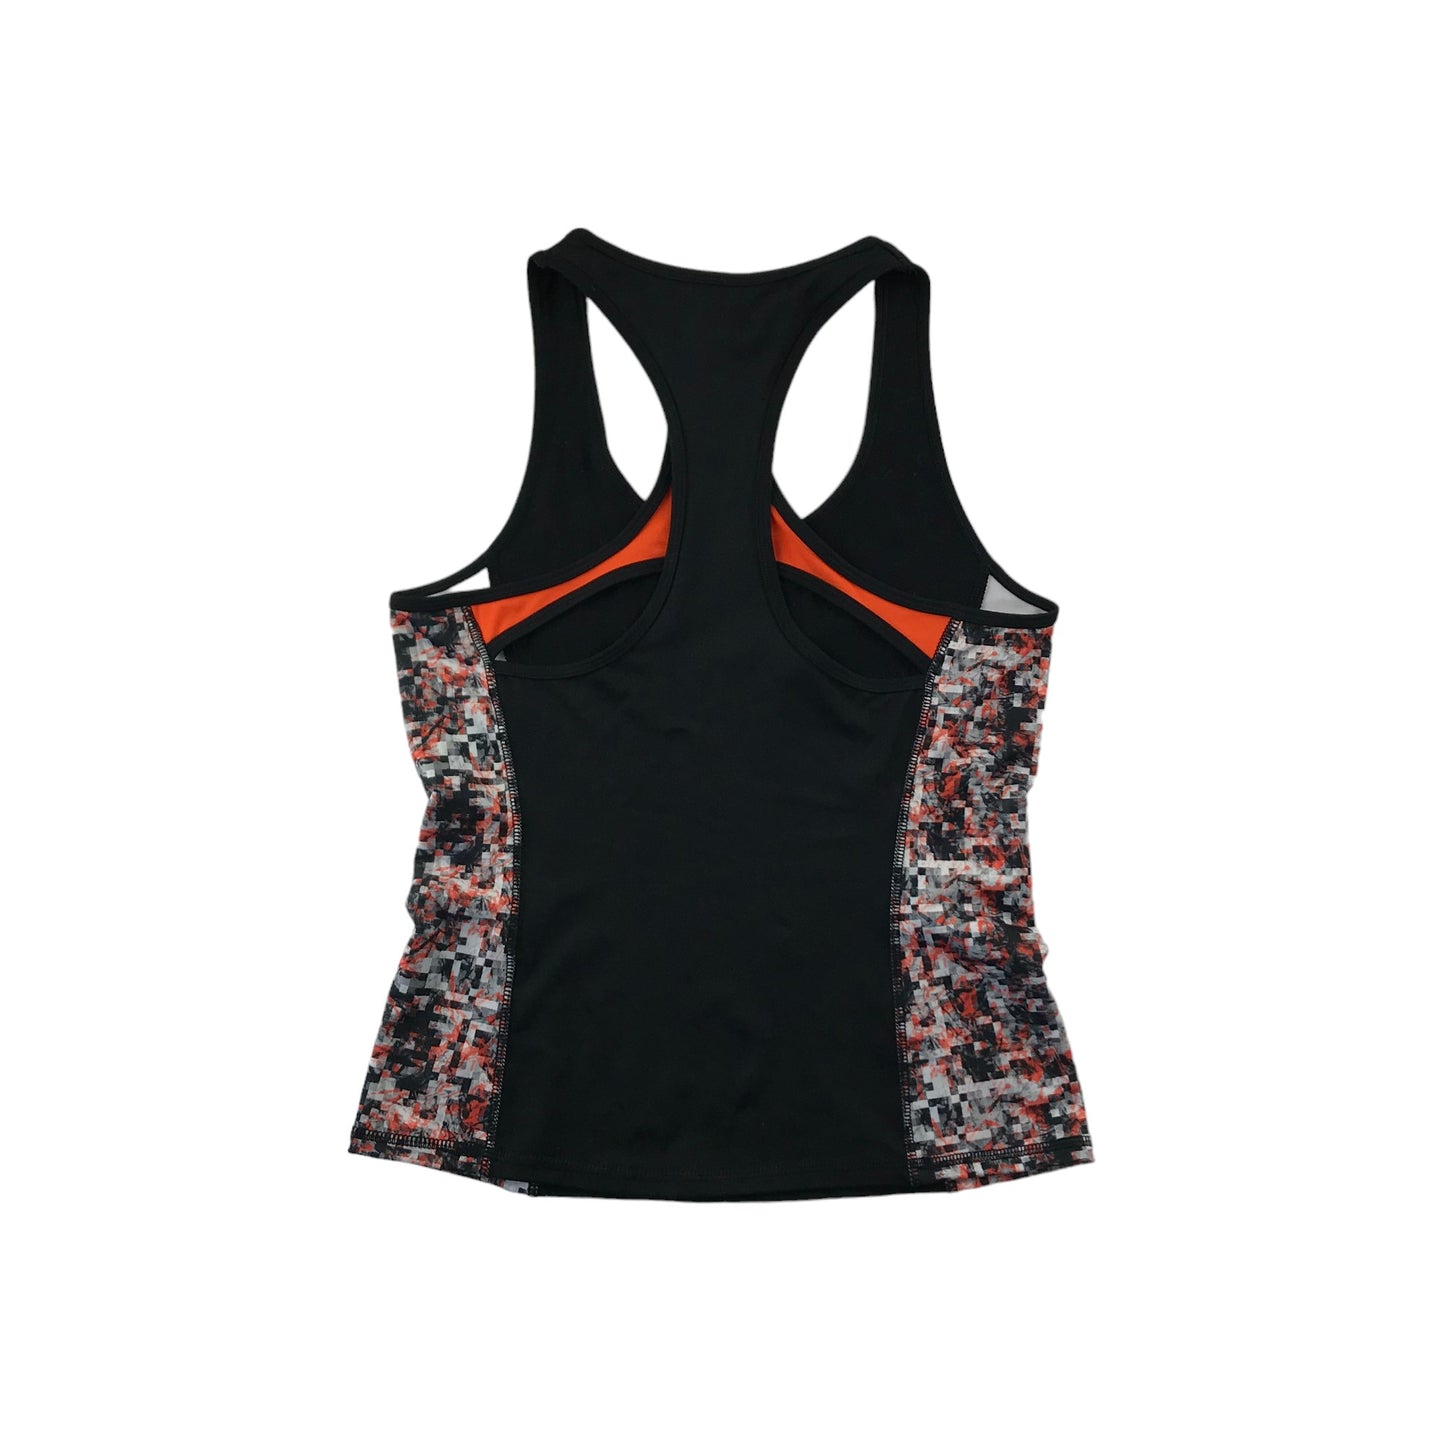 New Look Sport Set Size Women's M Black and Orange Top and Cropped Leggings